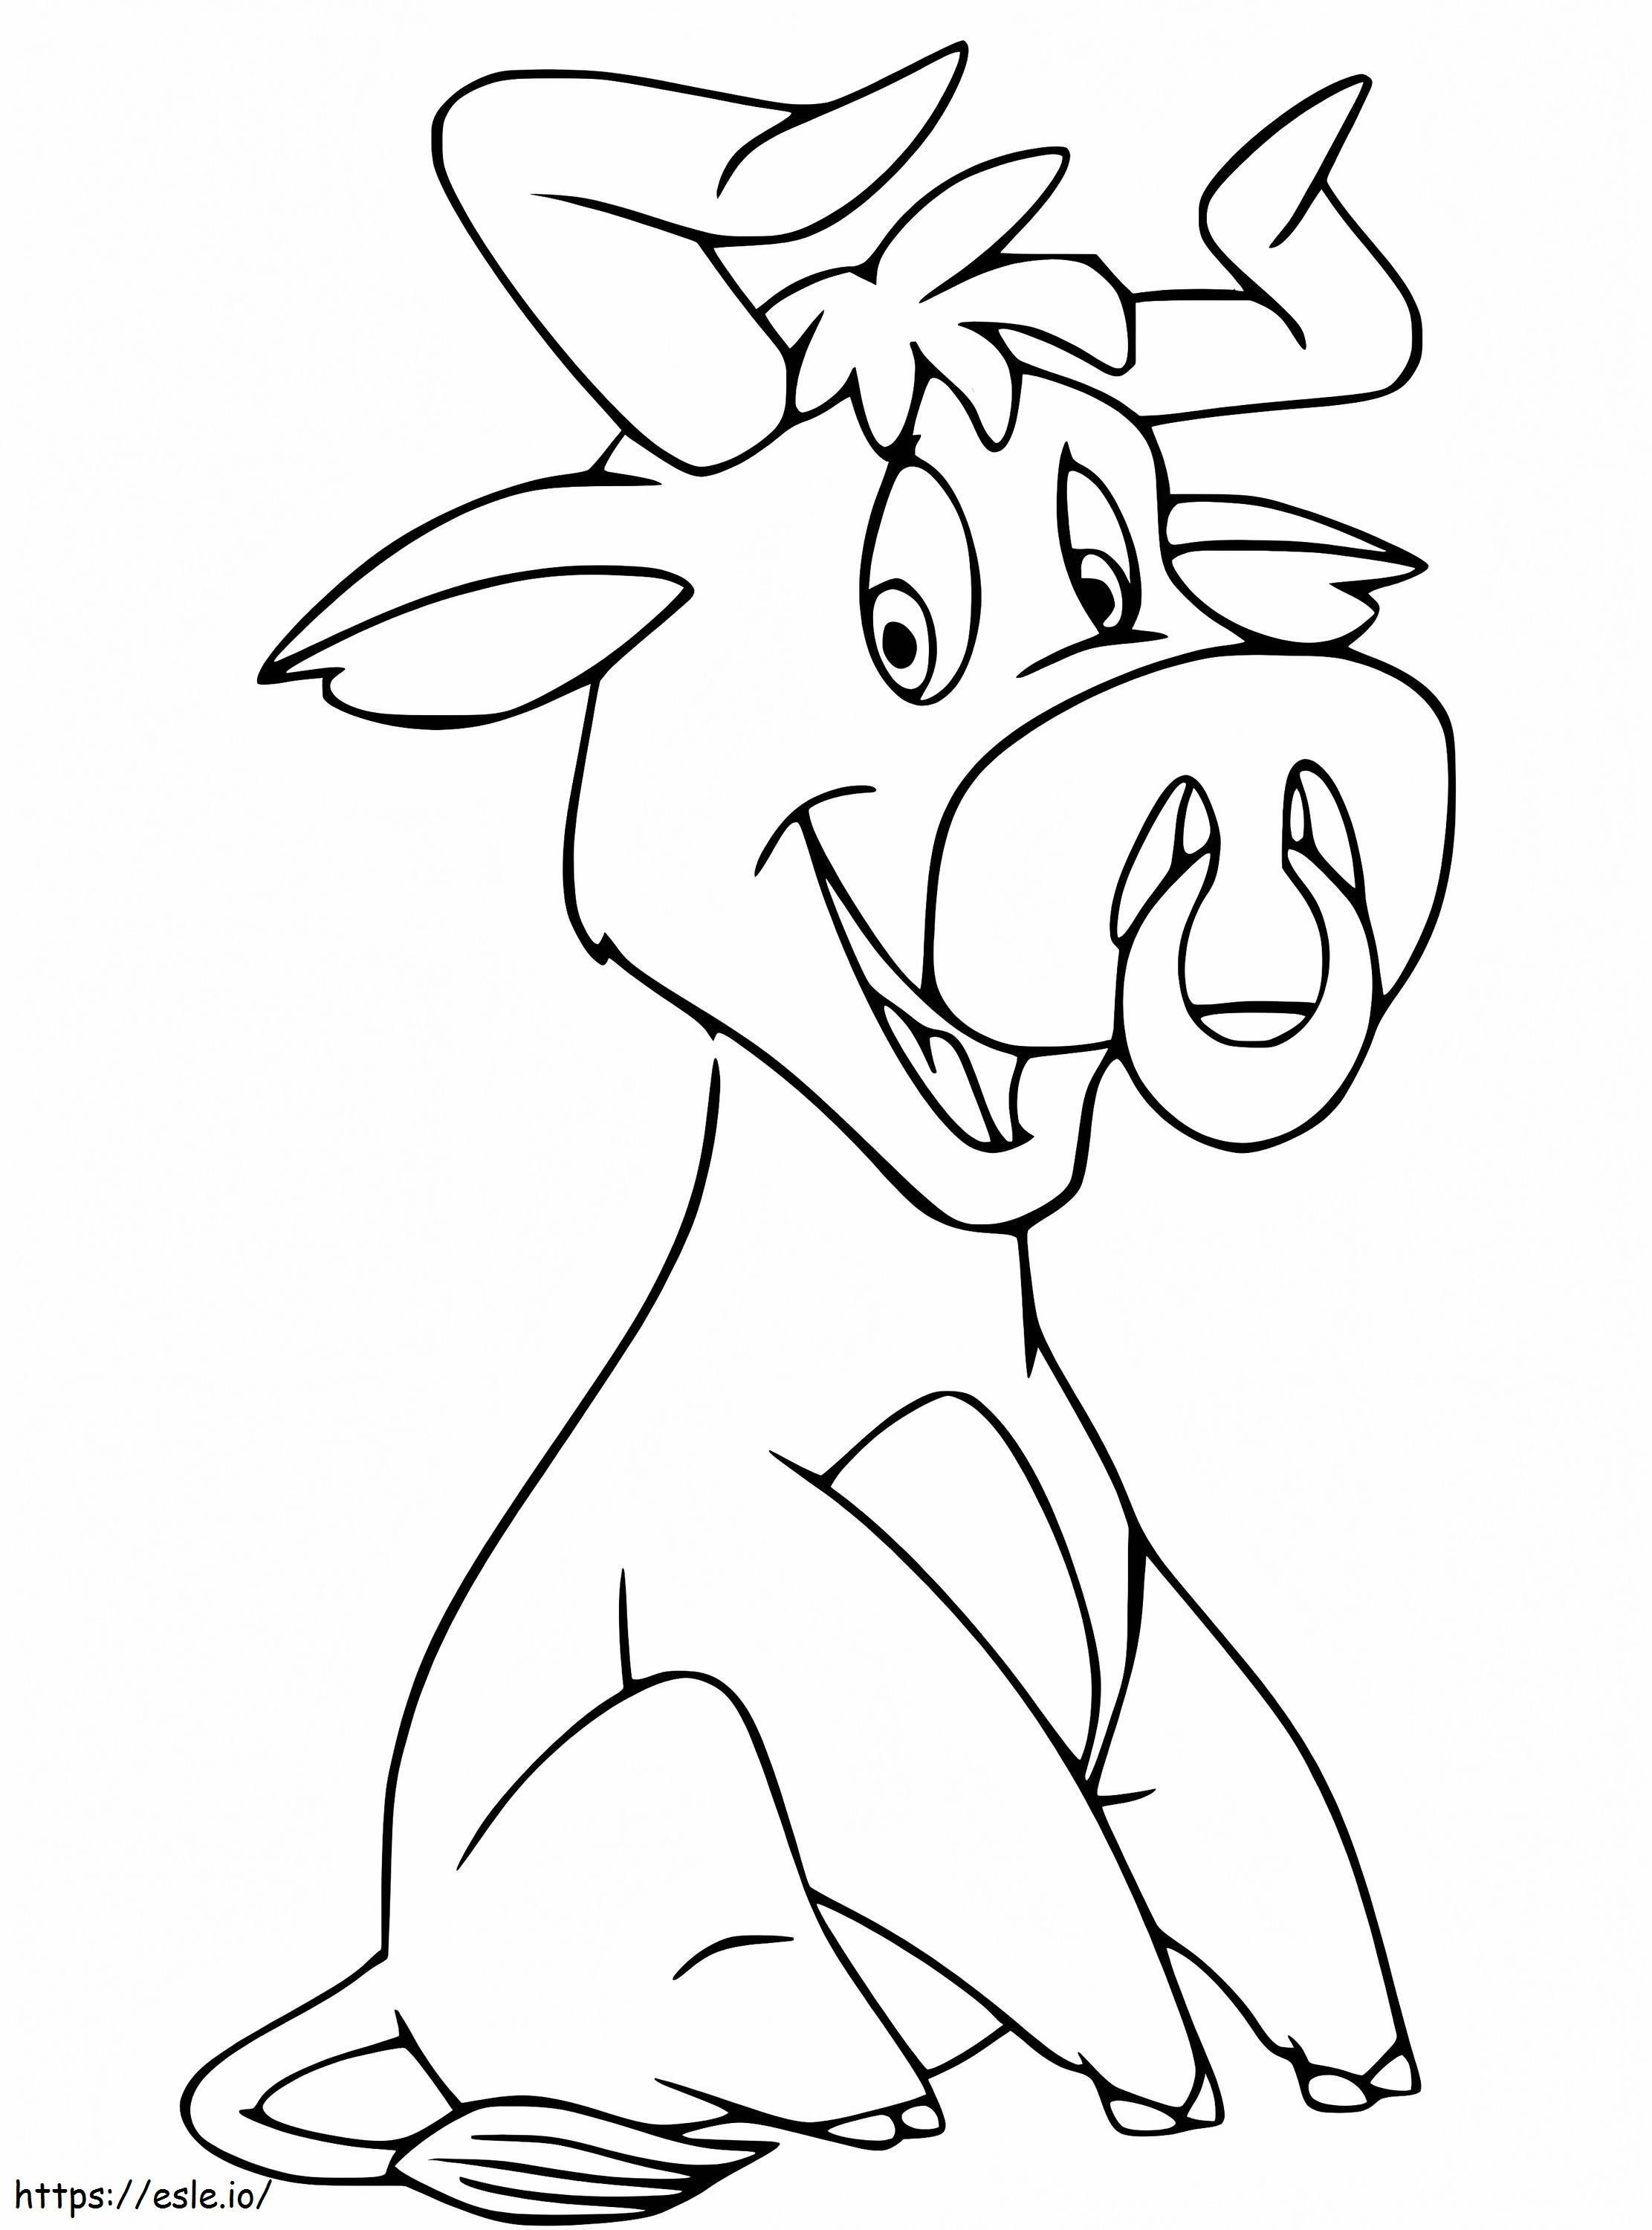 Cute Bull Smiling coloring page